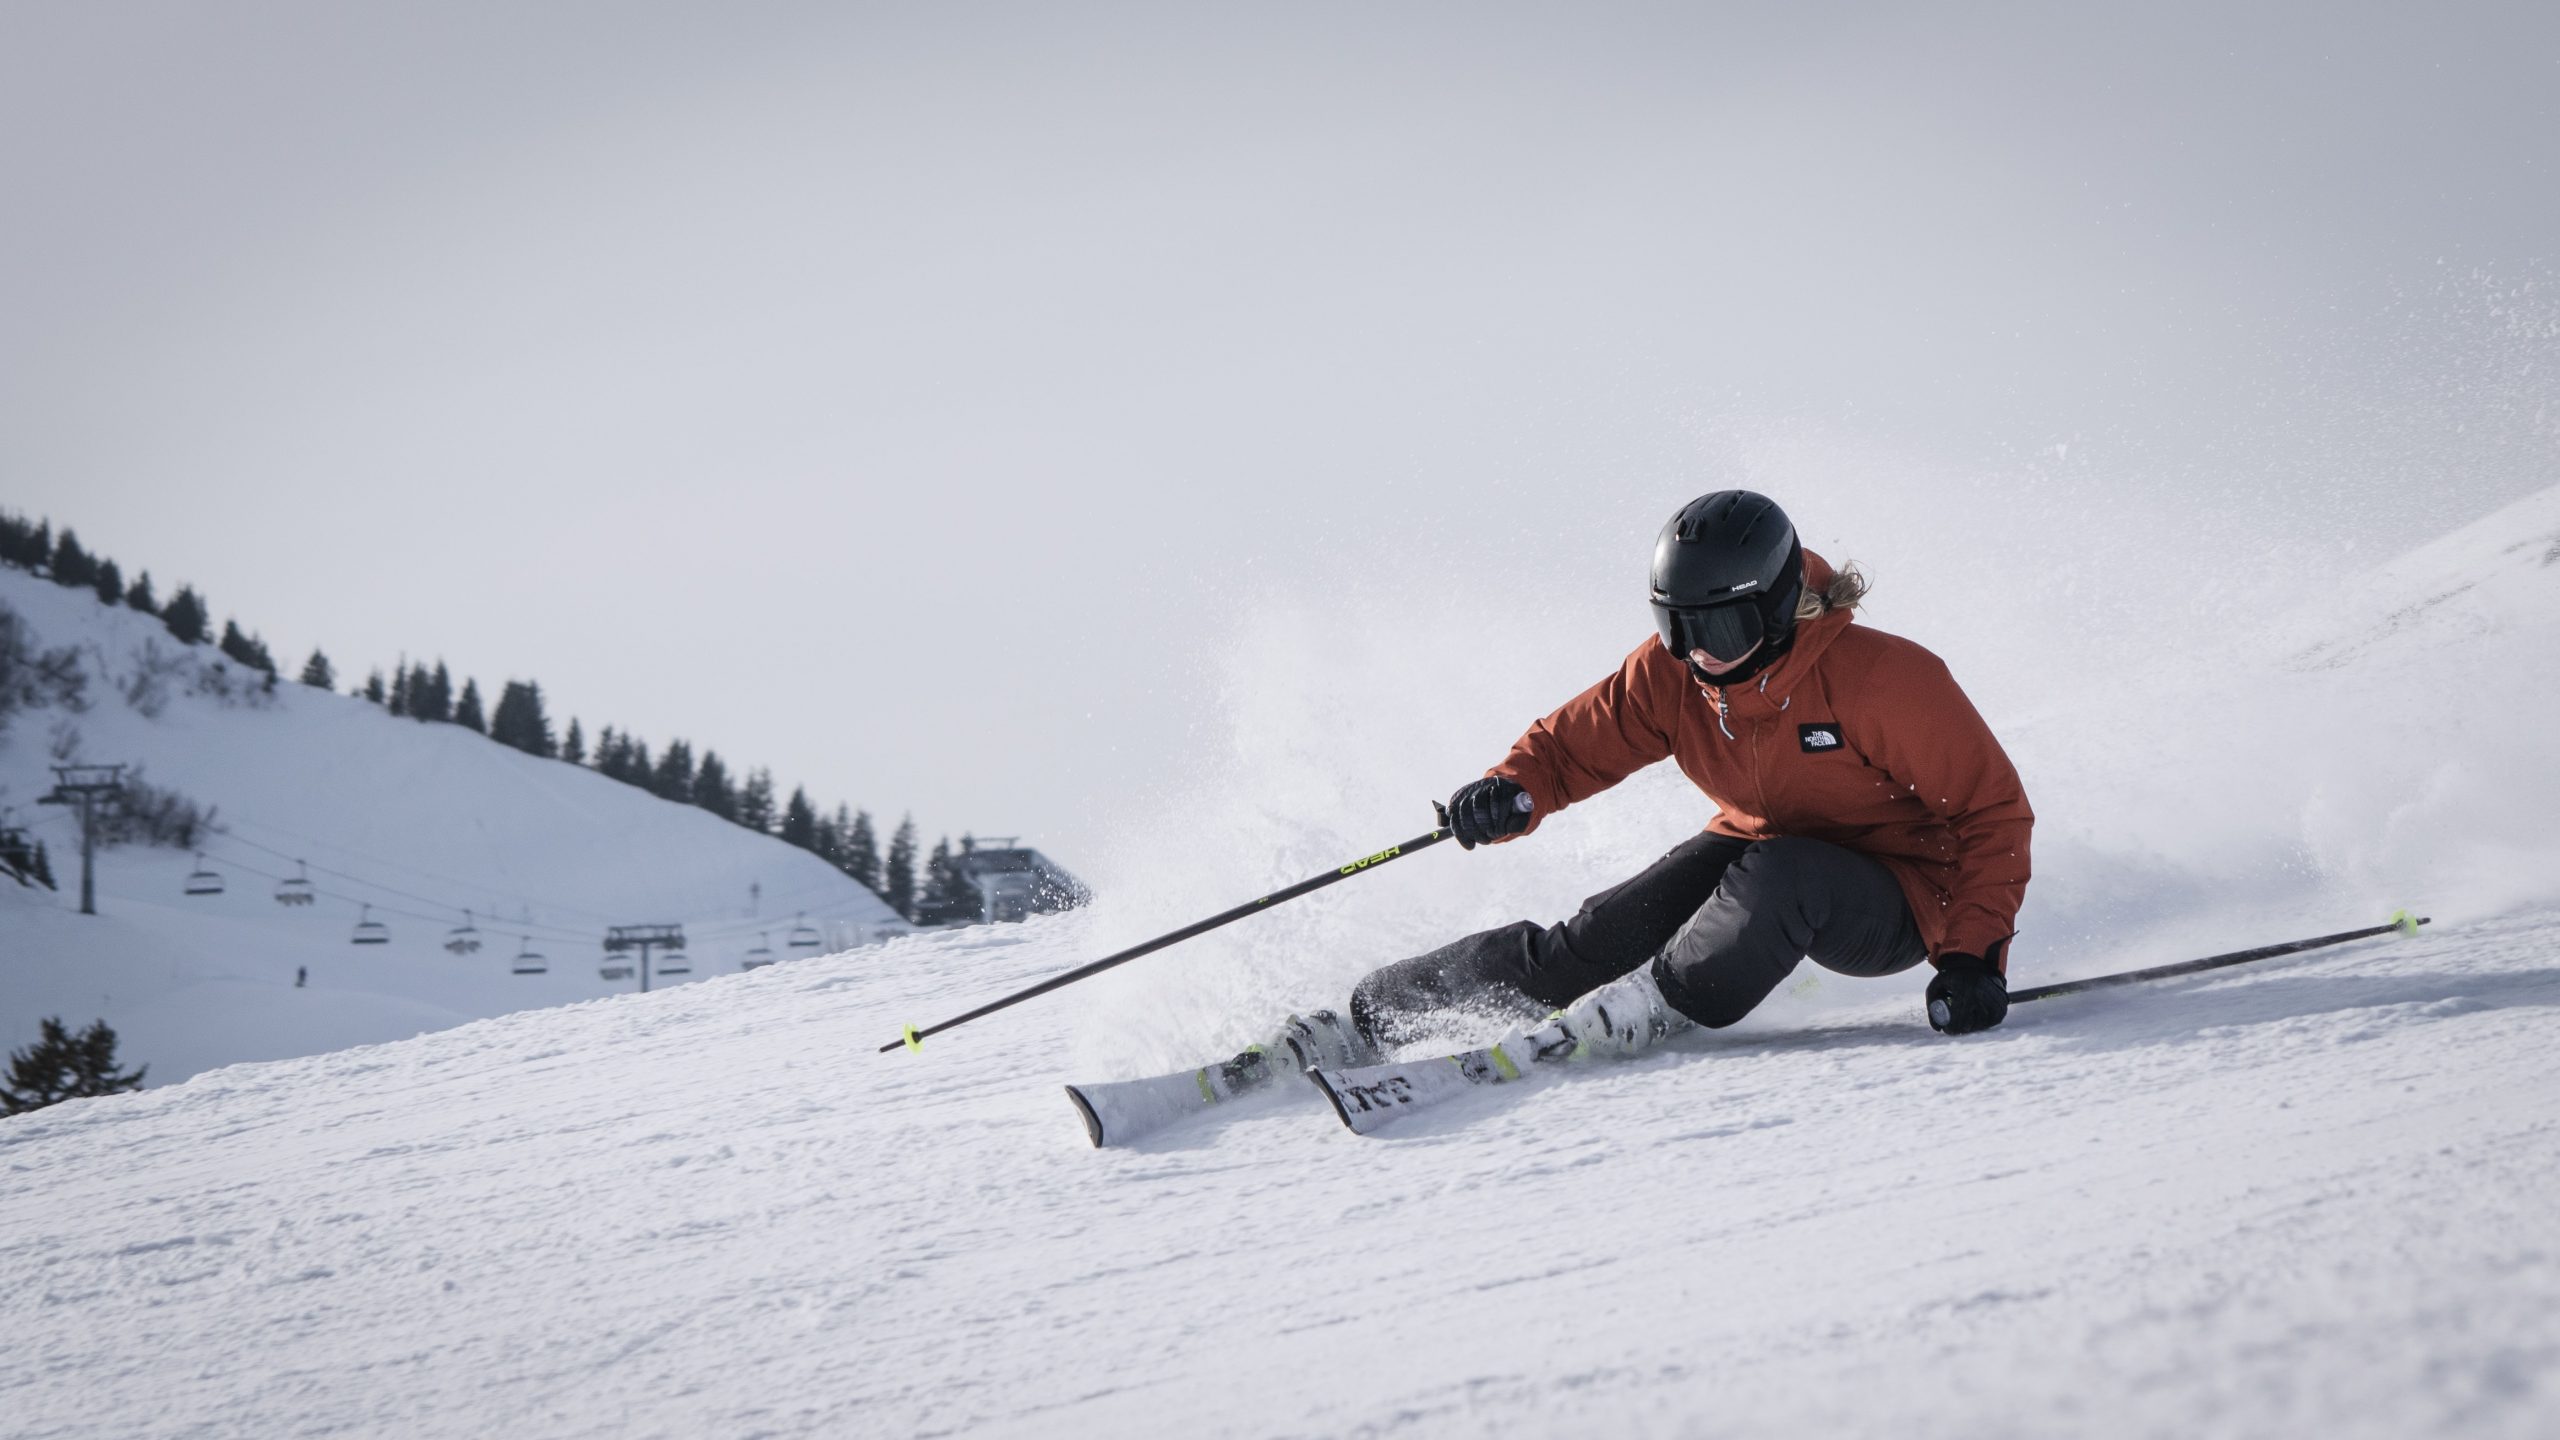 Common Skiing and Snowboarding Injuries